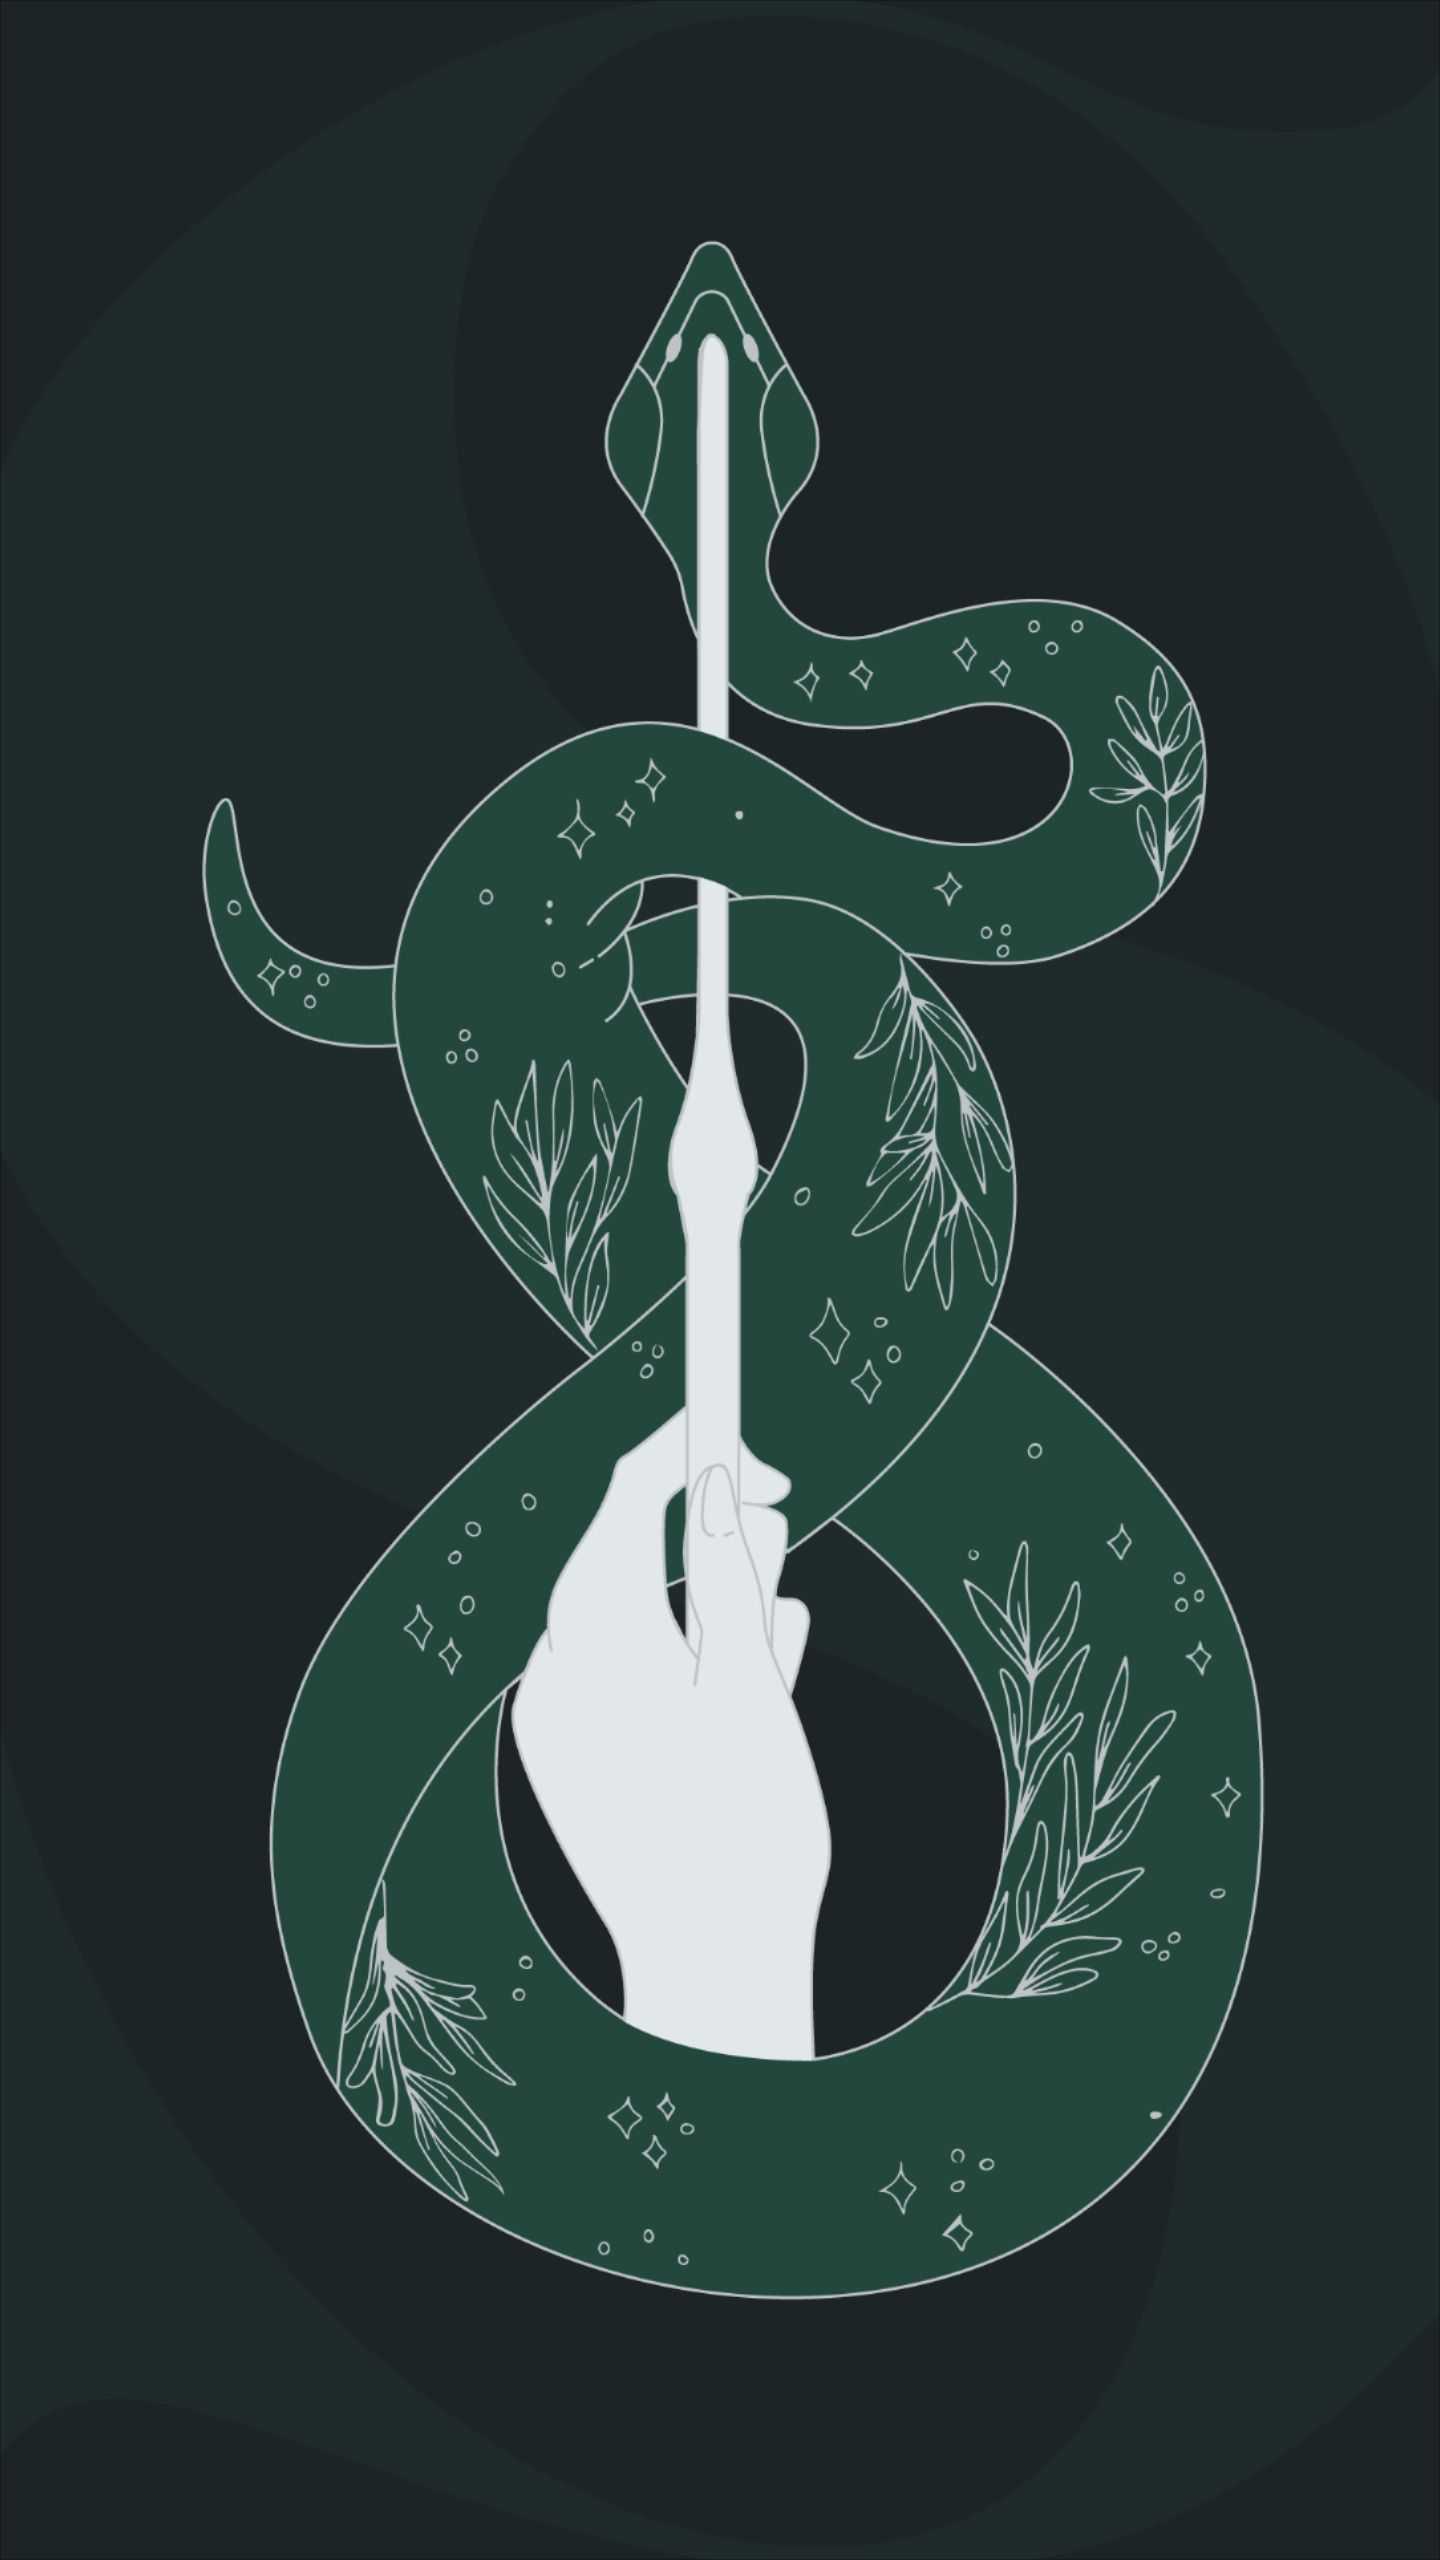 The poster for harry potter with a snake and hand - Slytherin